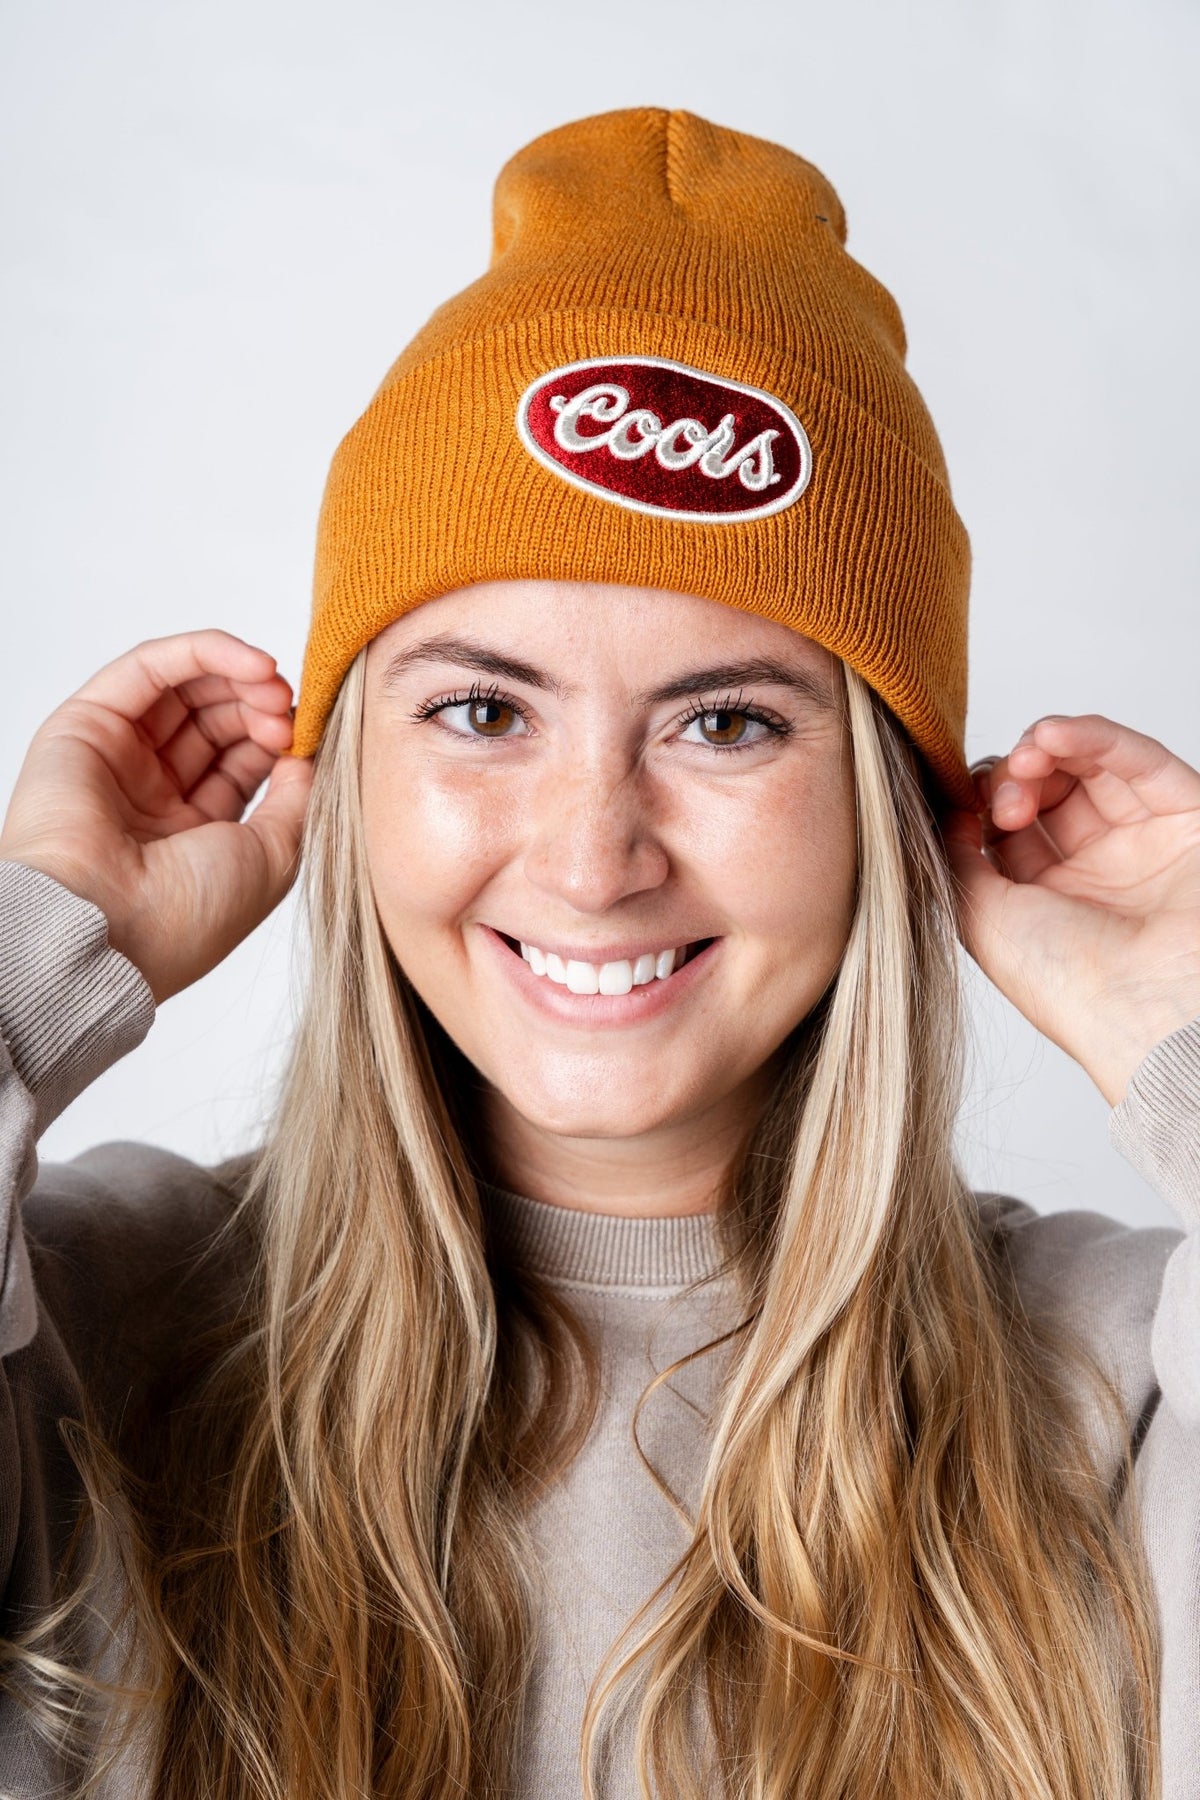 Coors cuffed knit beanie hazel - Trendy Gifts at Lush Fashion Lounge Boutique in Oklahoma City